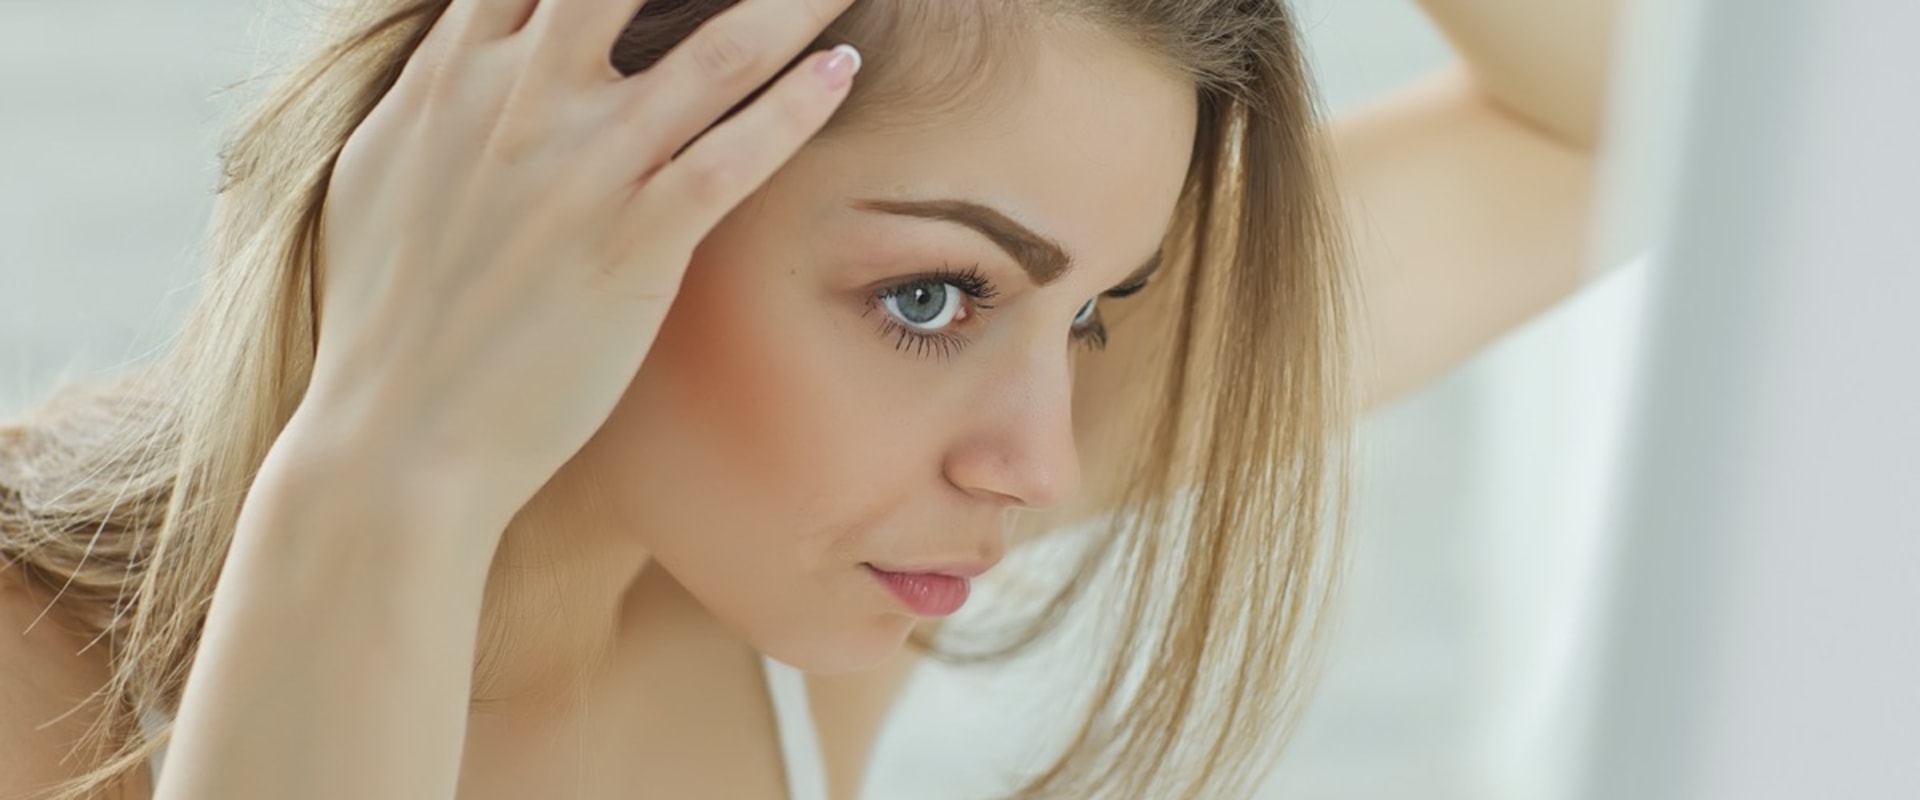 How do you stop hair loss when dieting?